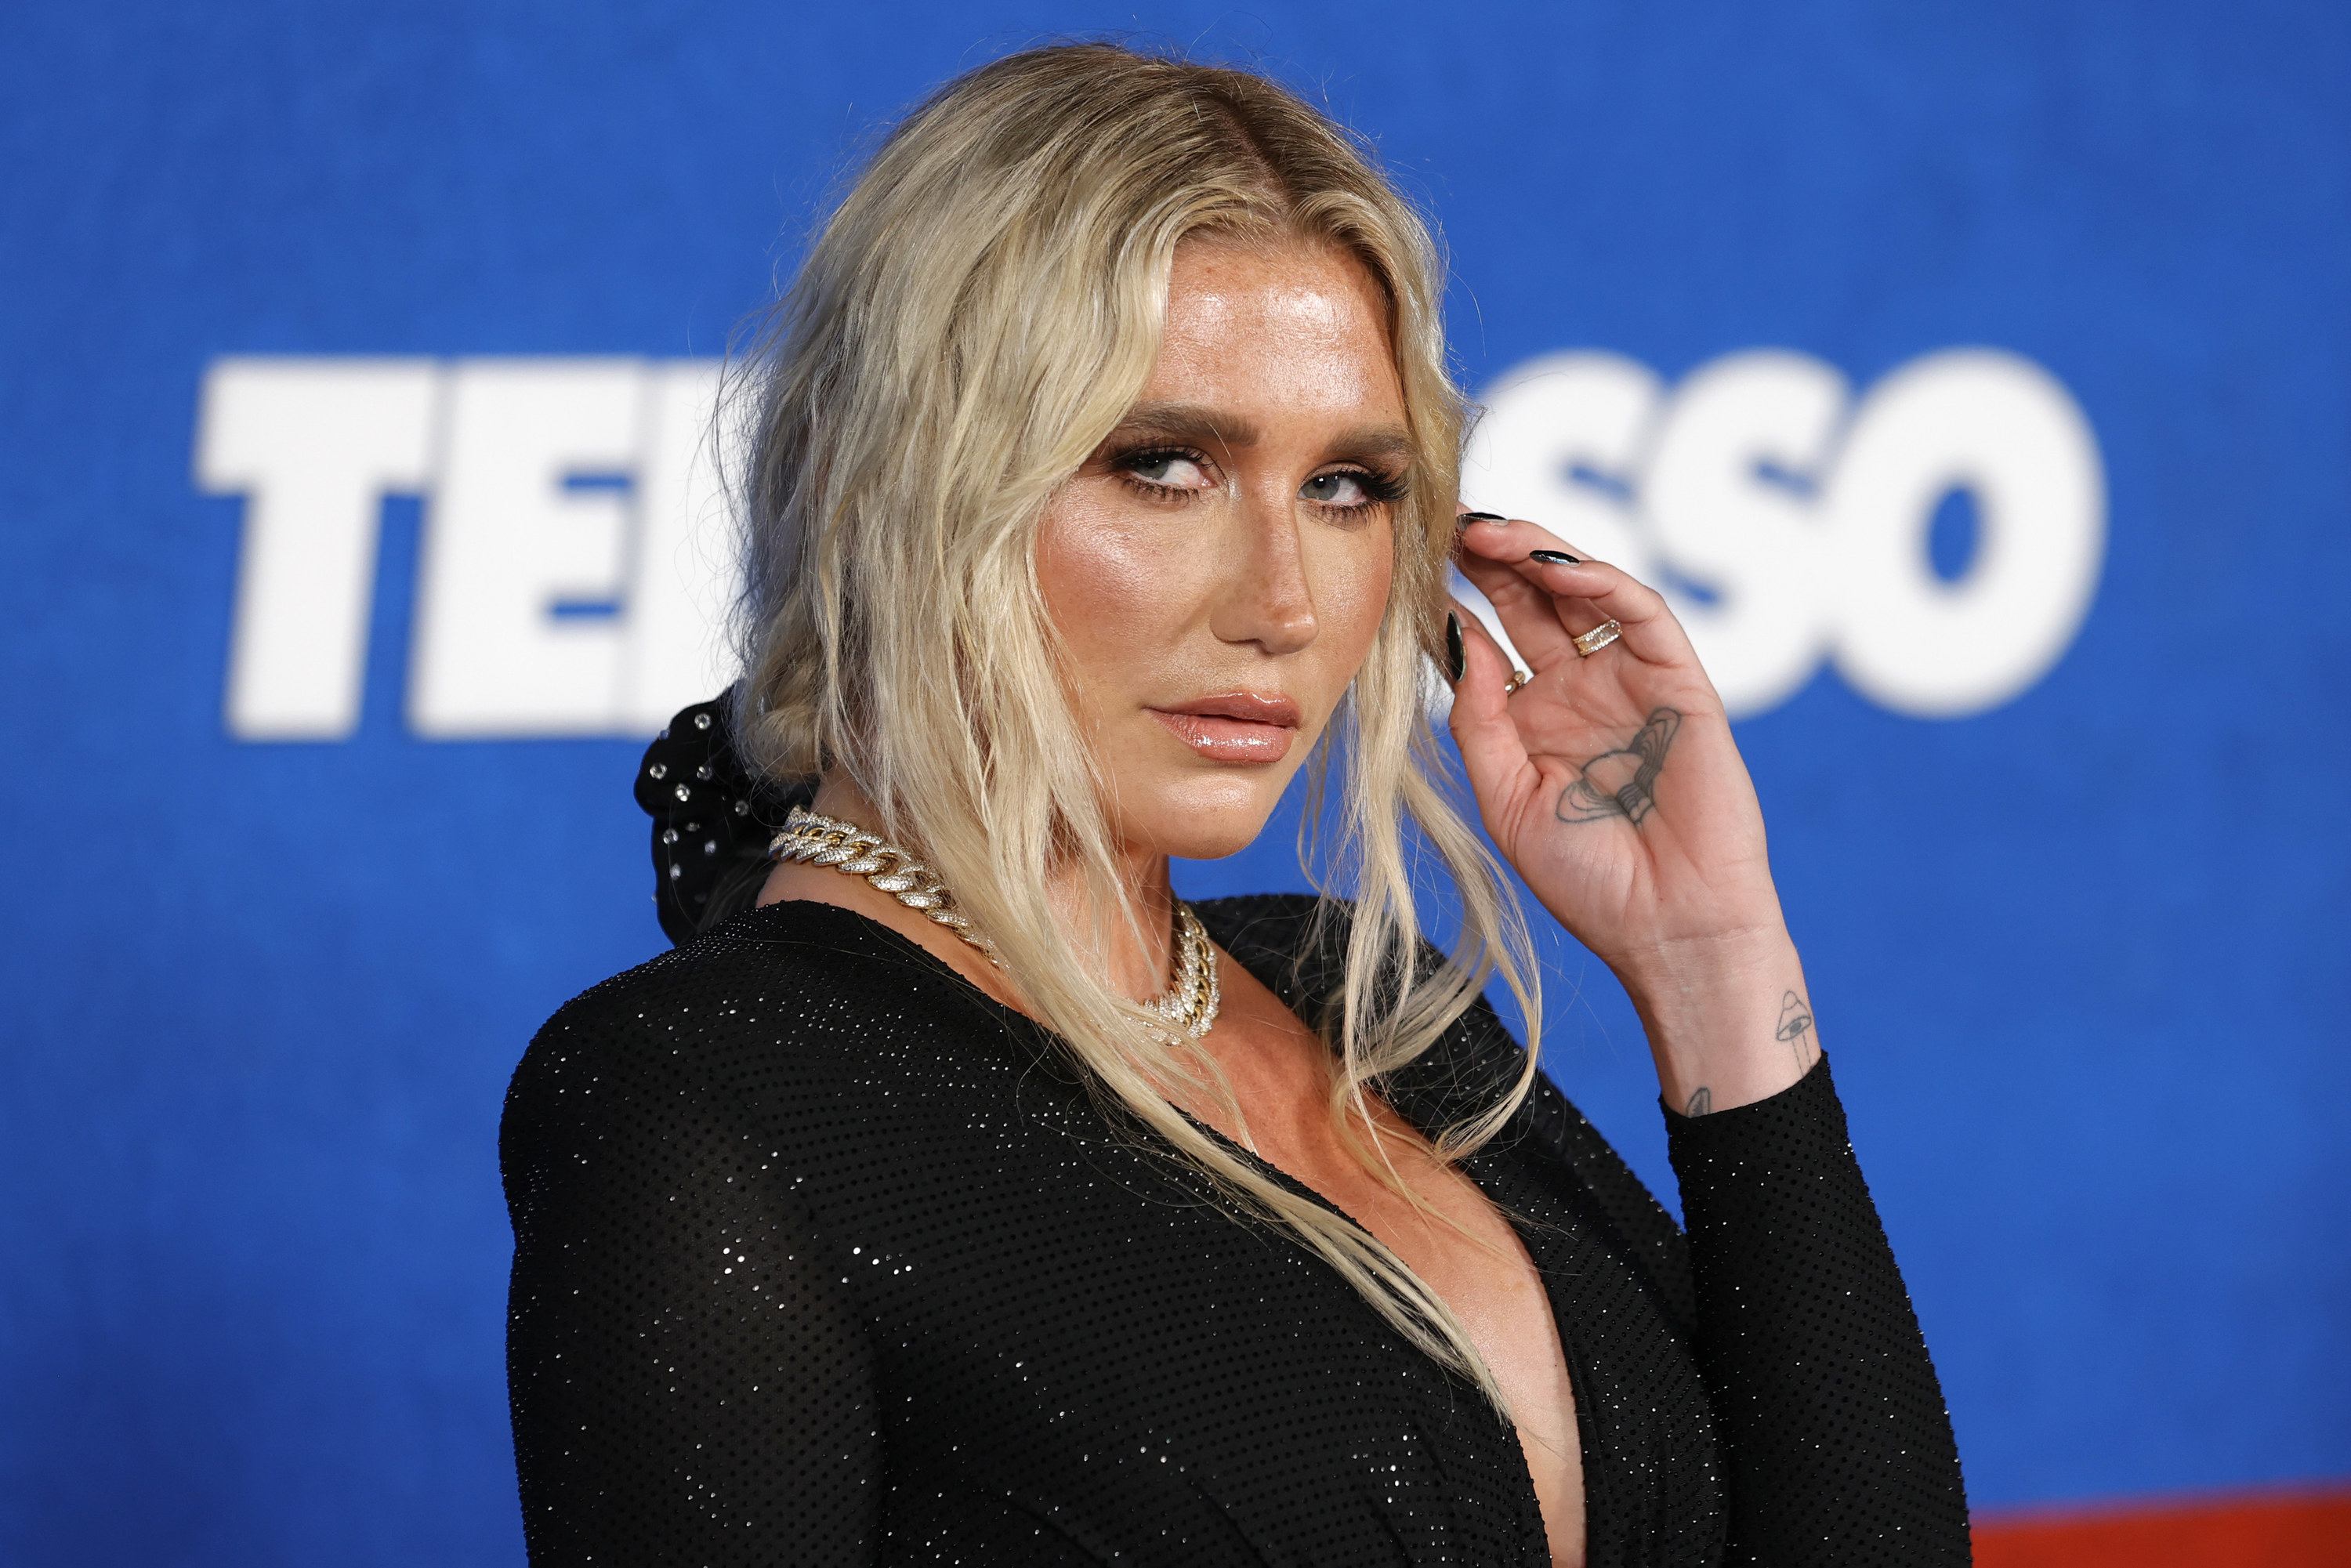 Kesha looking at the camera with a sultry expression